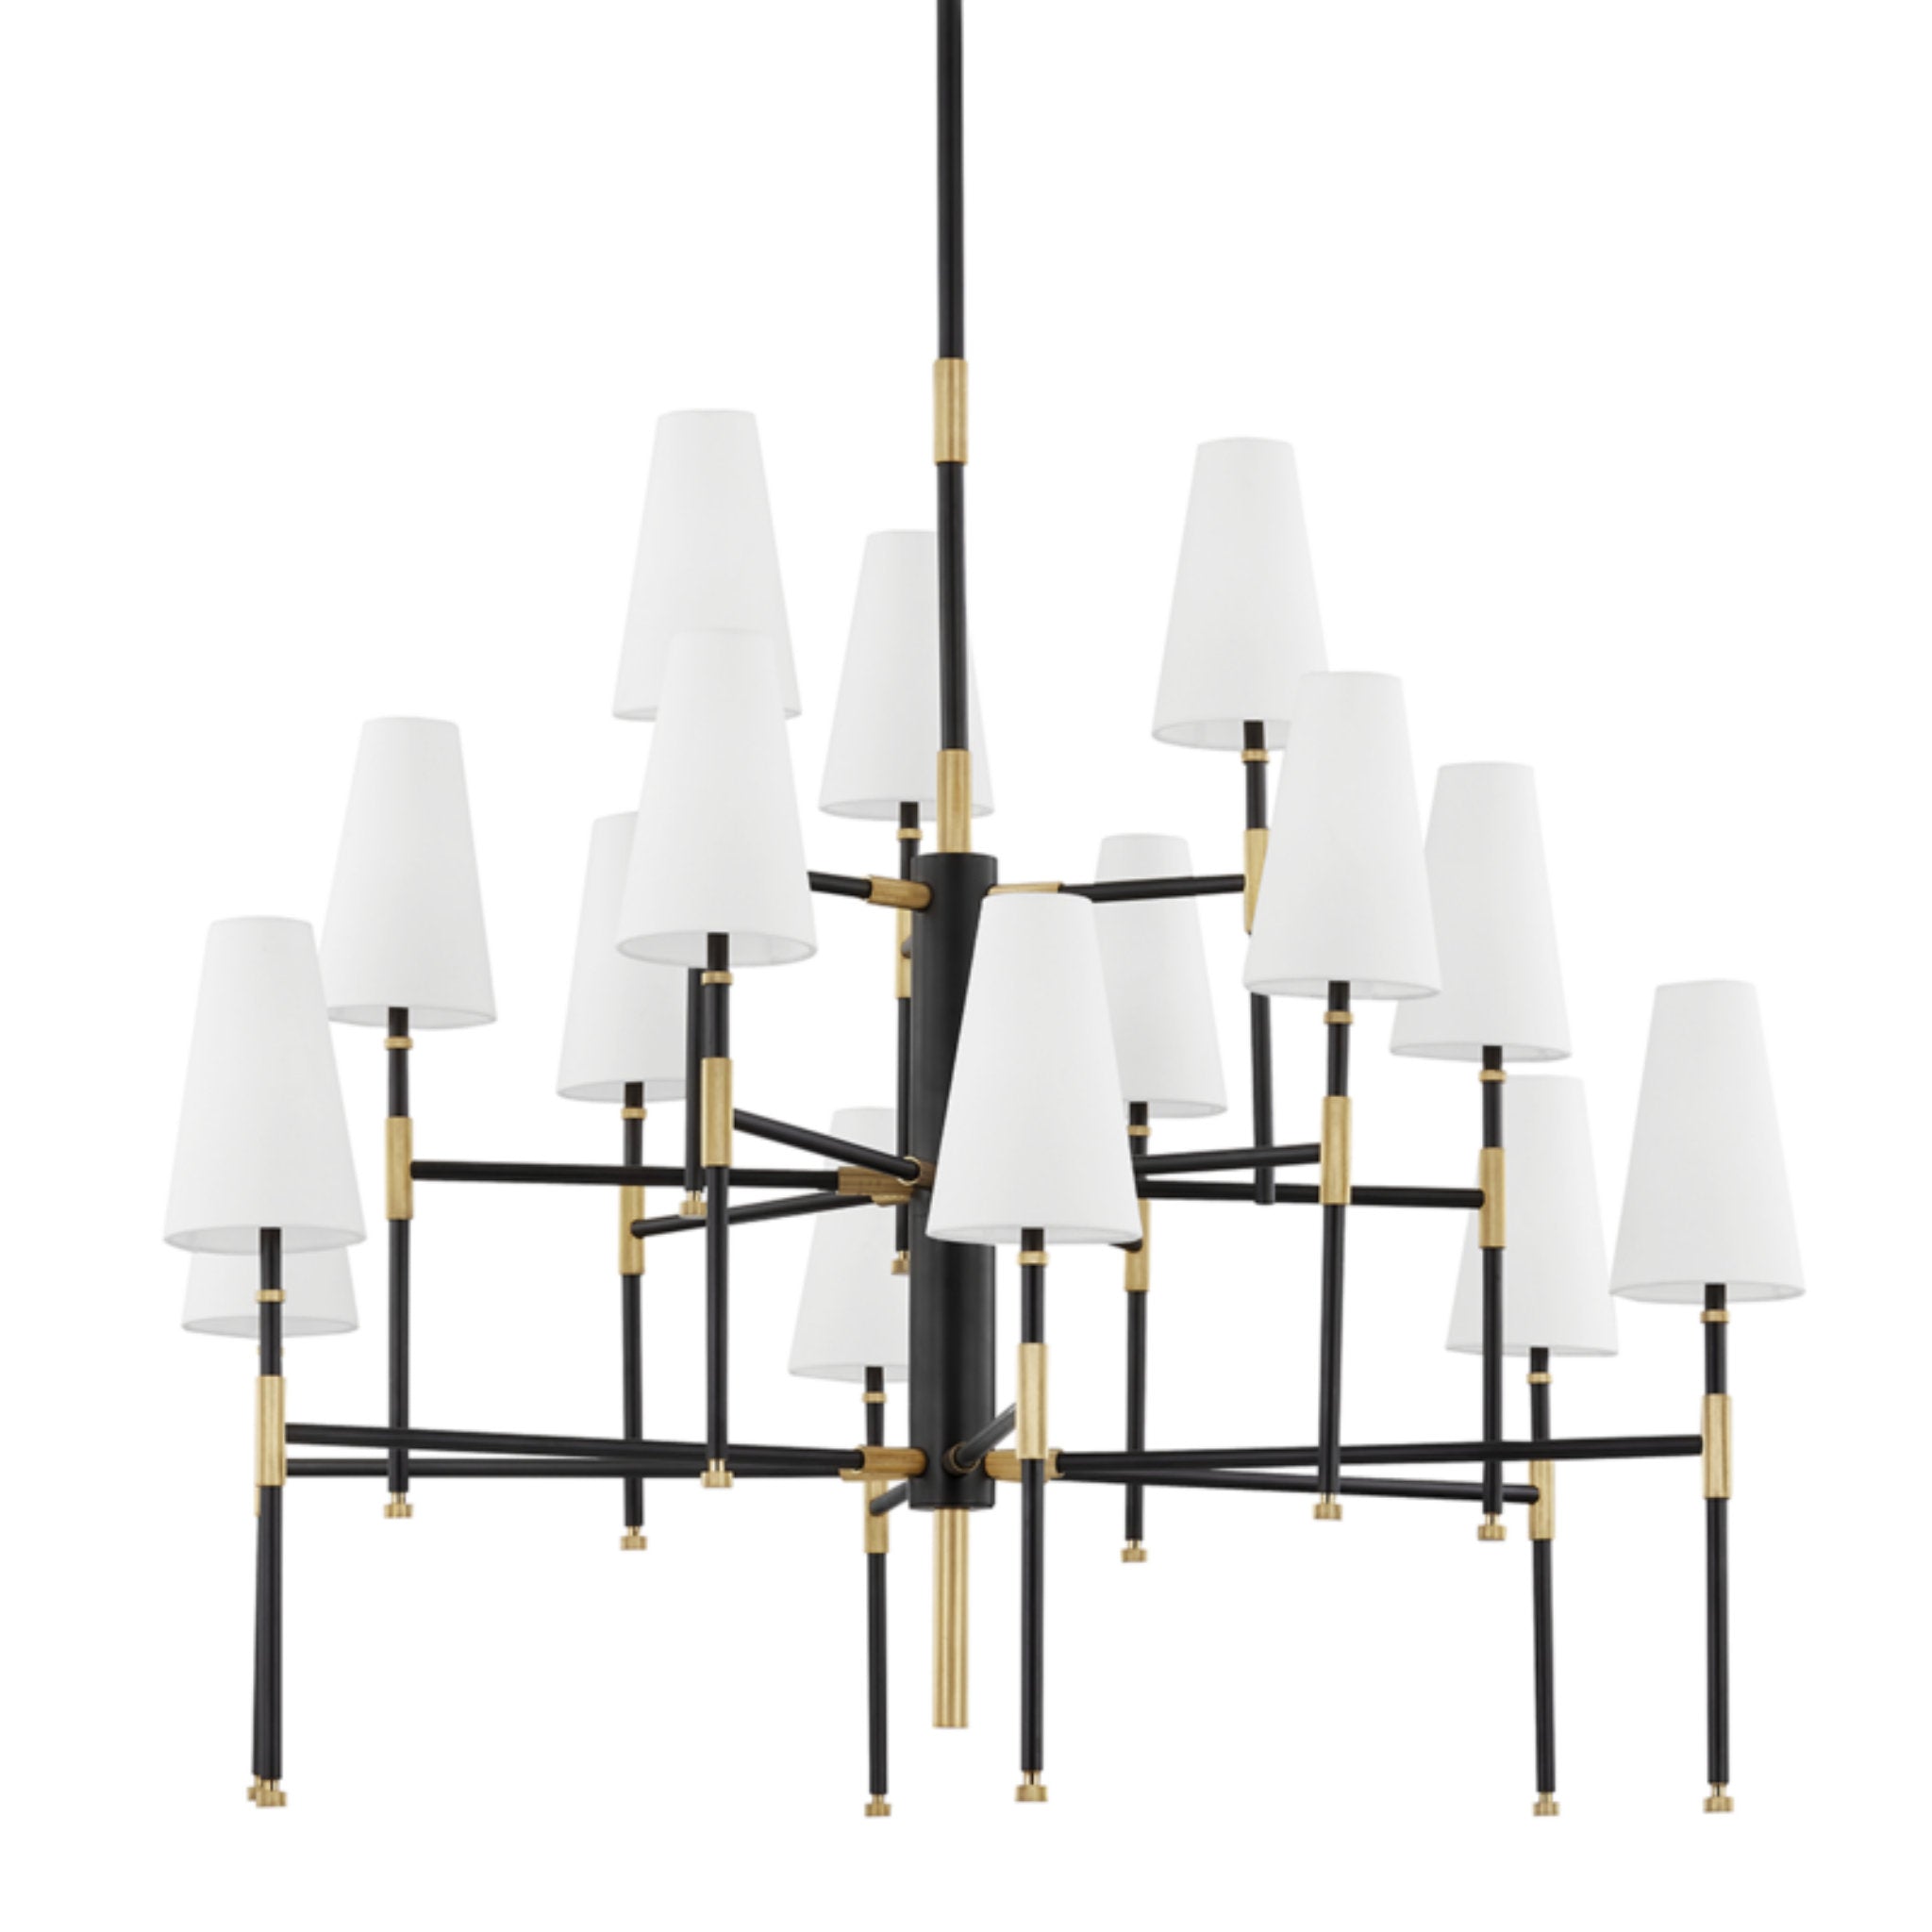 Bowery 15 Light Chandelier in Aged Old Bronze